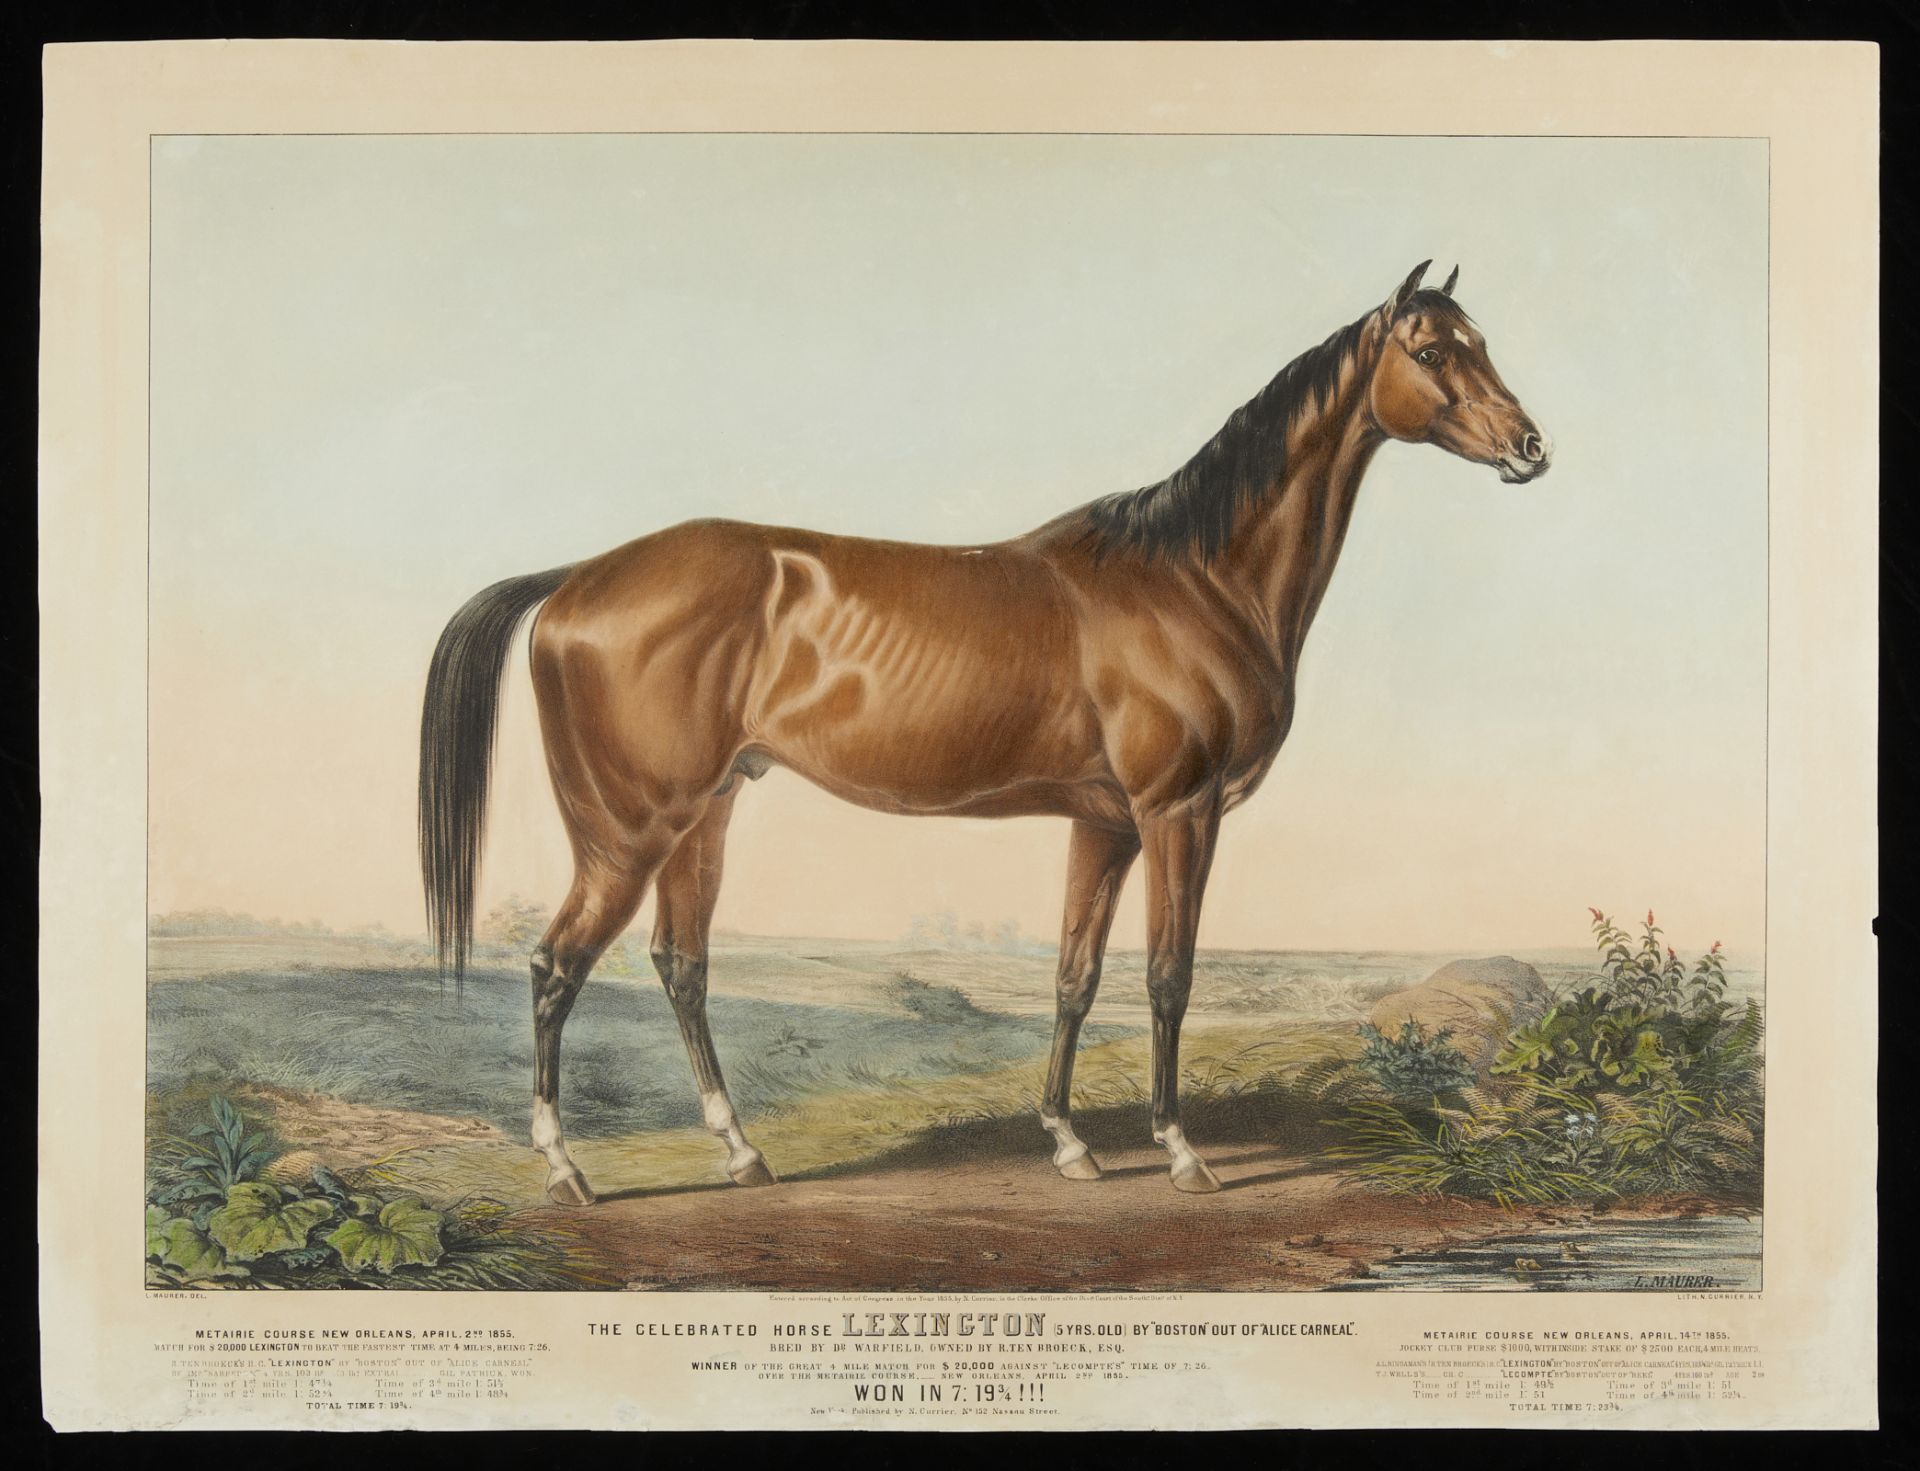 Currier & Ives "Celebrated Horse Lexington" Print - Image 3 of 11